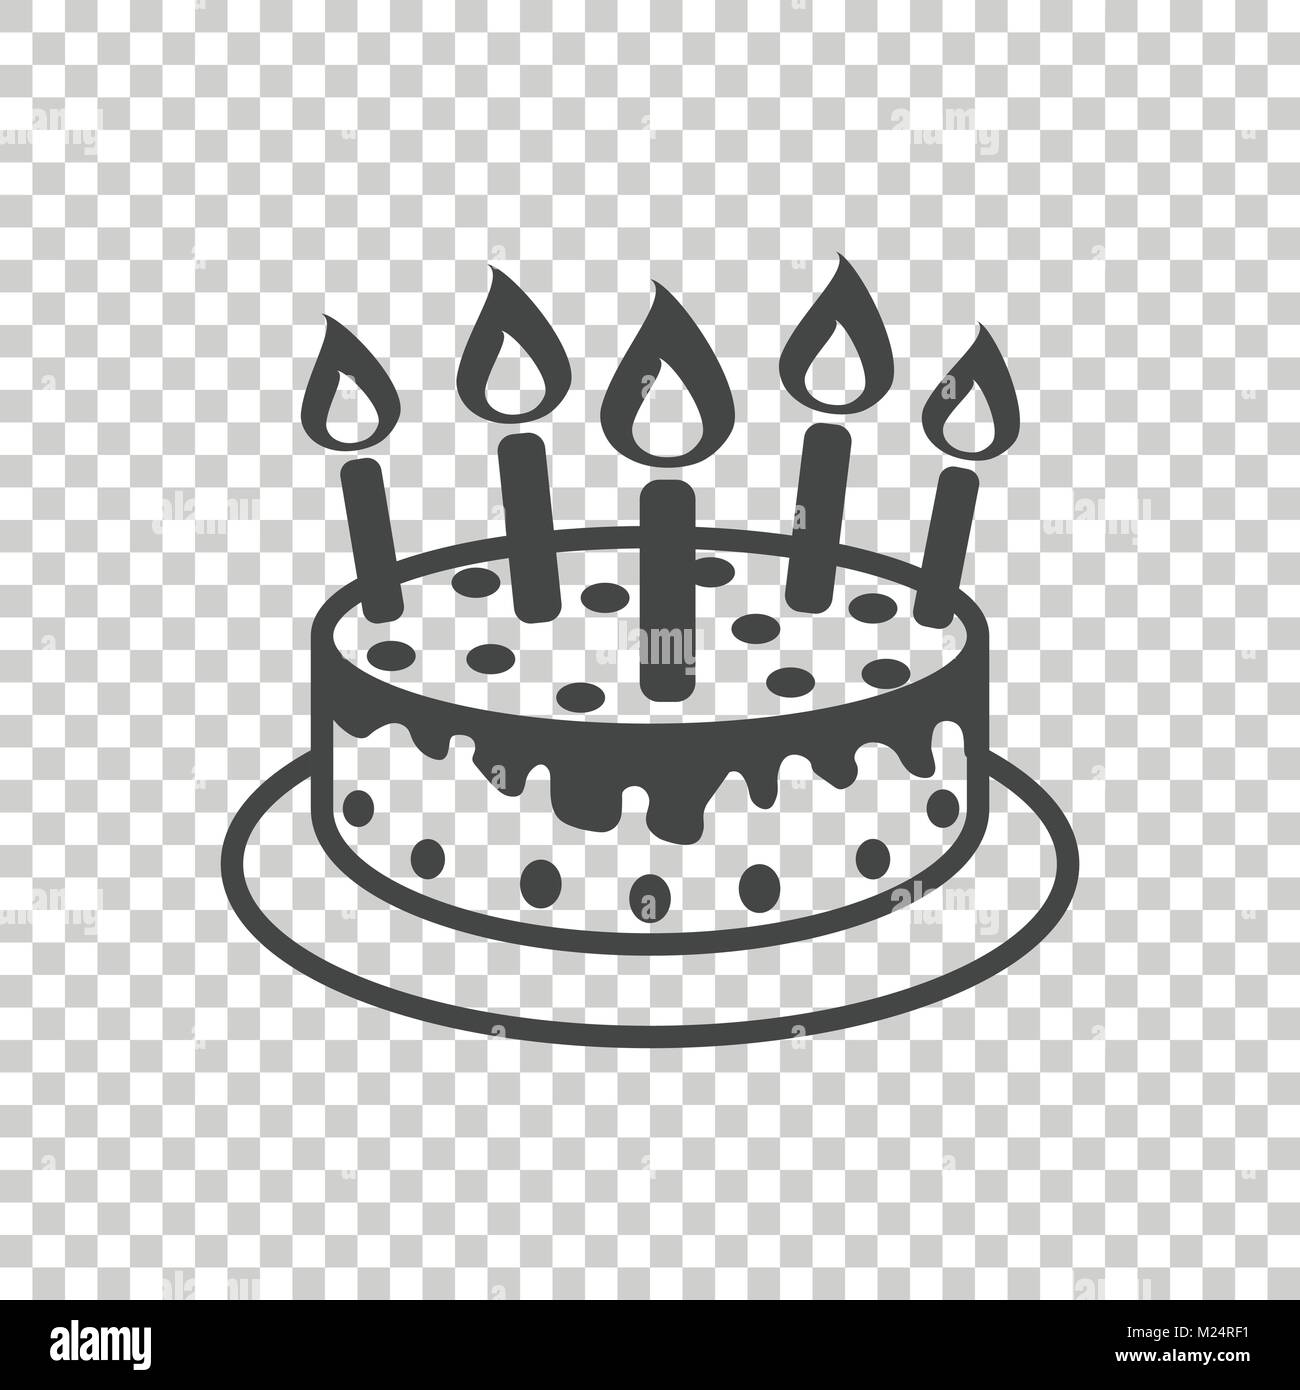 Cake With Candle Icon Simple Flat Pictogram For Business Marketing Internet Concept On Isolated Background Trendy Modern Vector Symbol For Web Sit Stock Vector Image Art Alamy